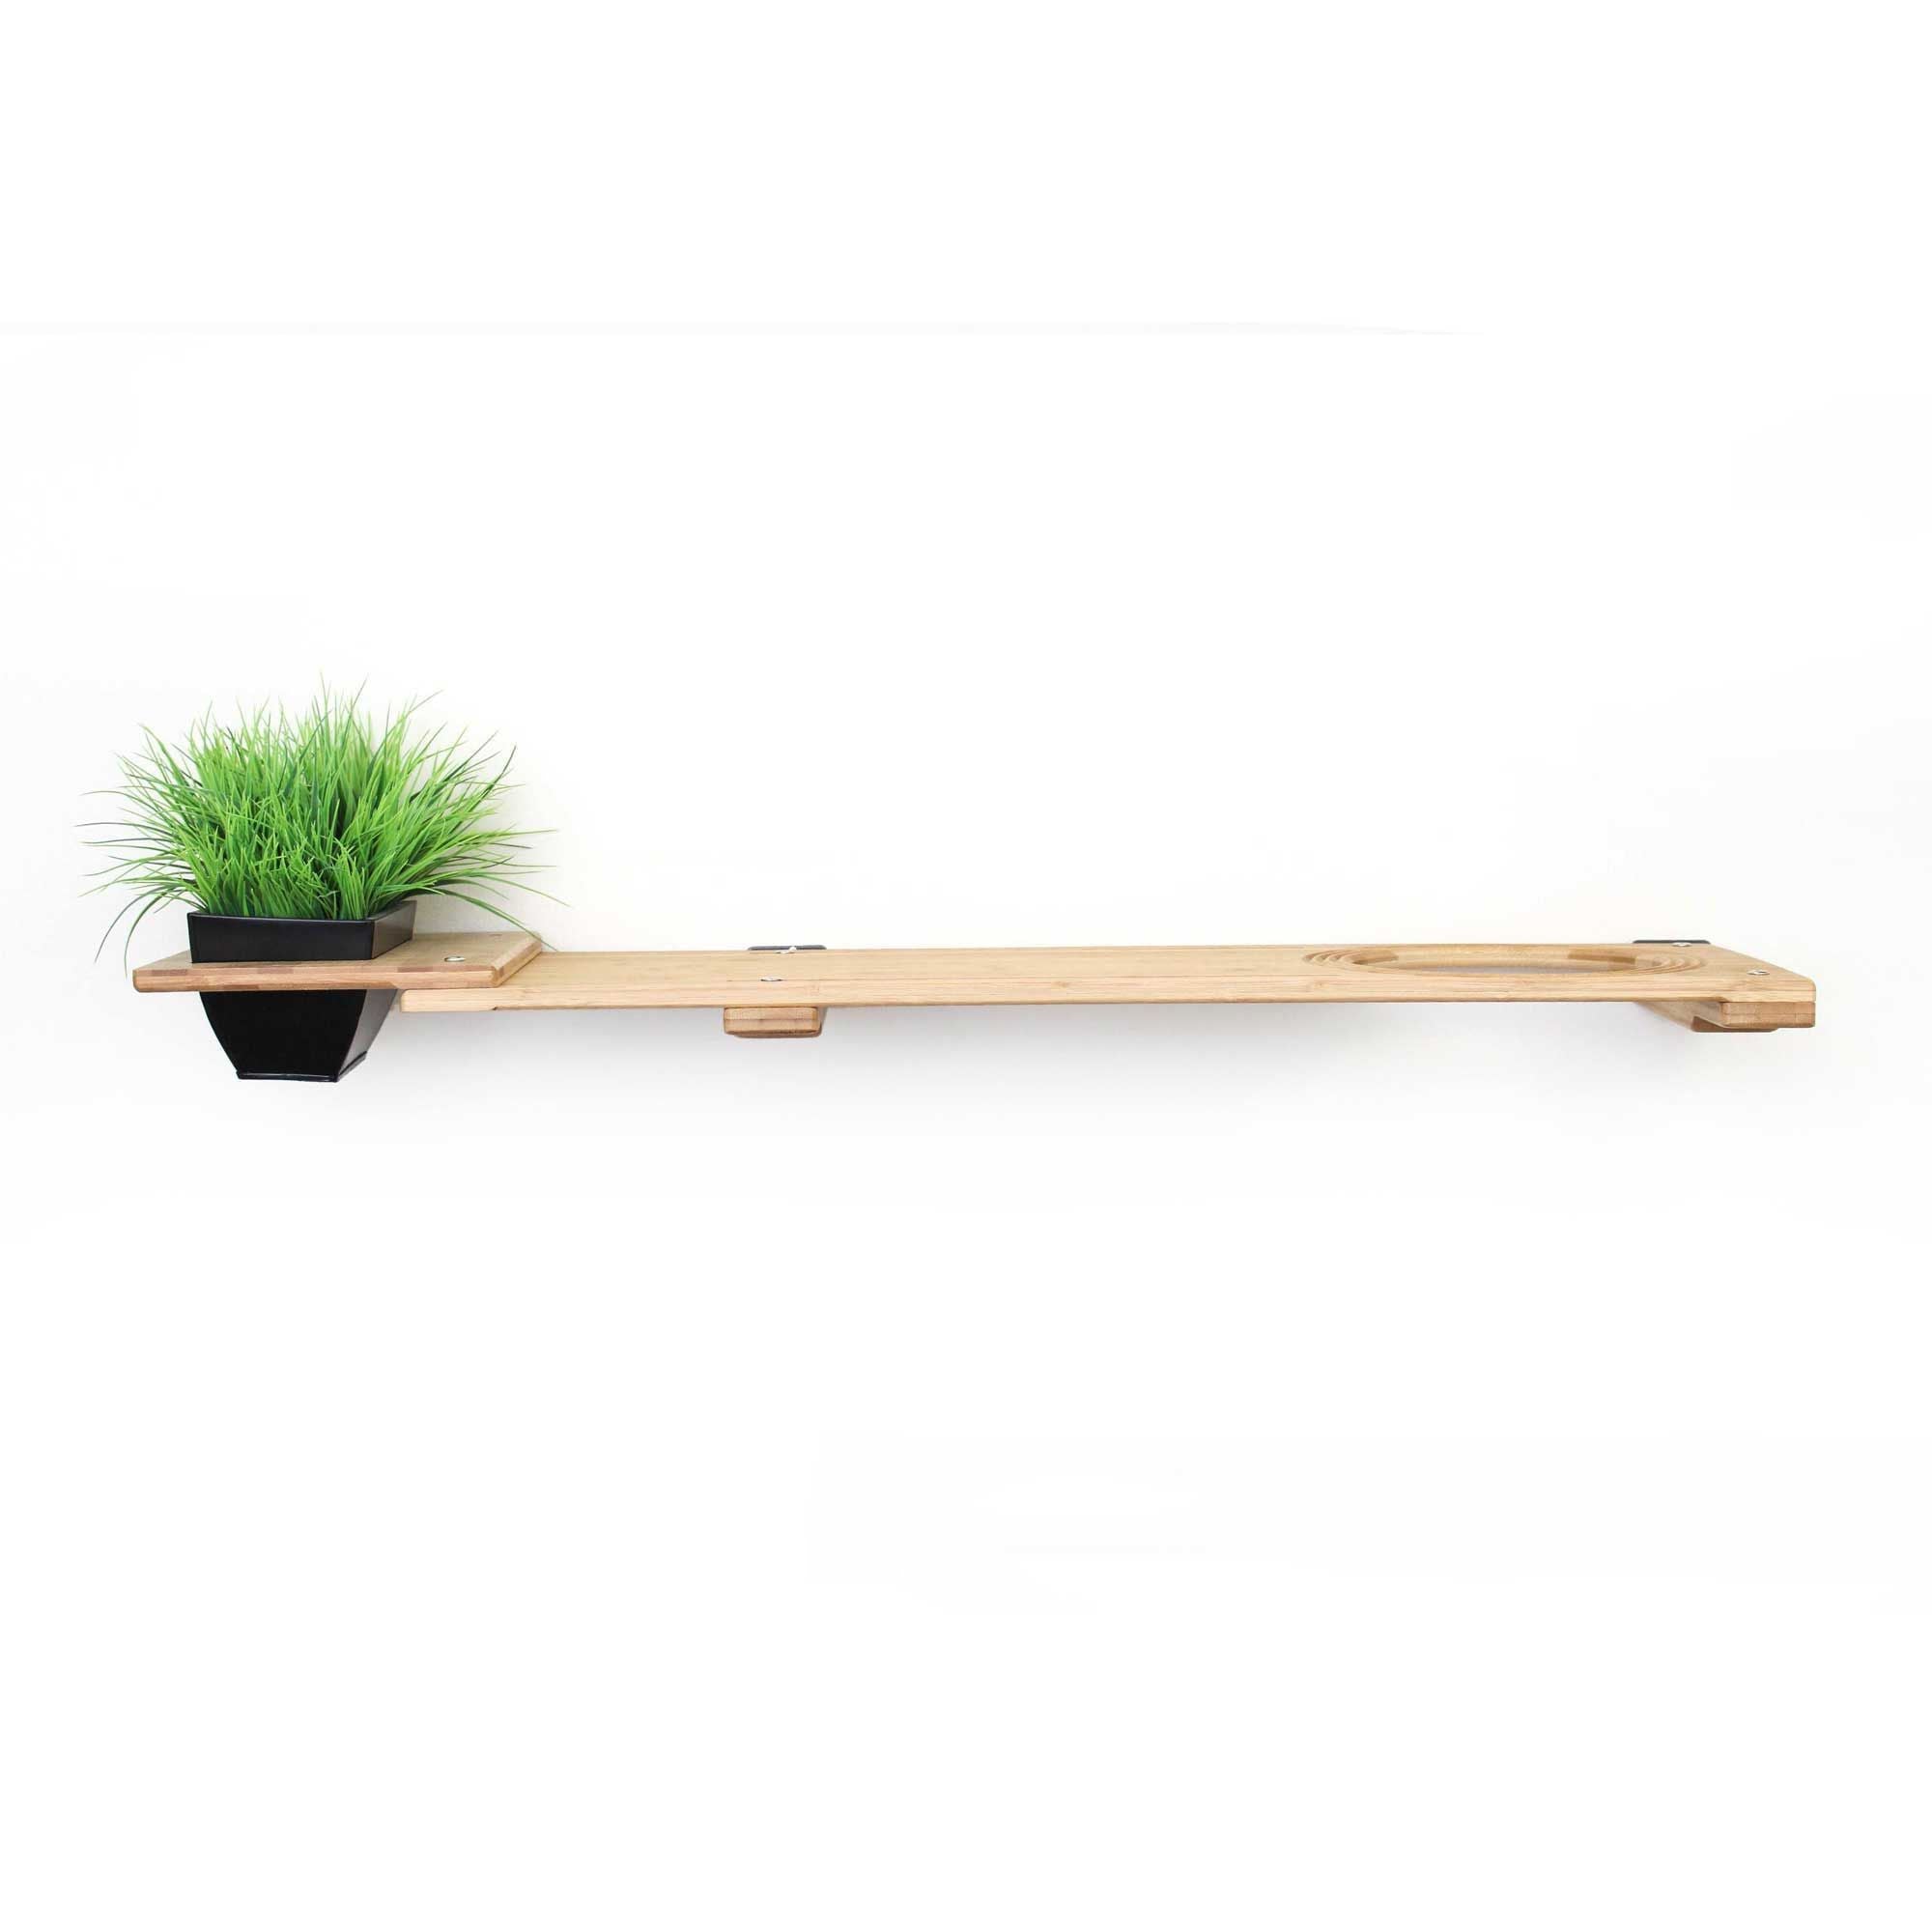 41 Inch Planter Escape Hatch in Natural bamboo